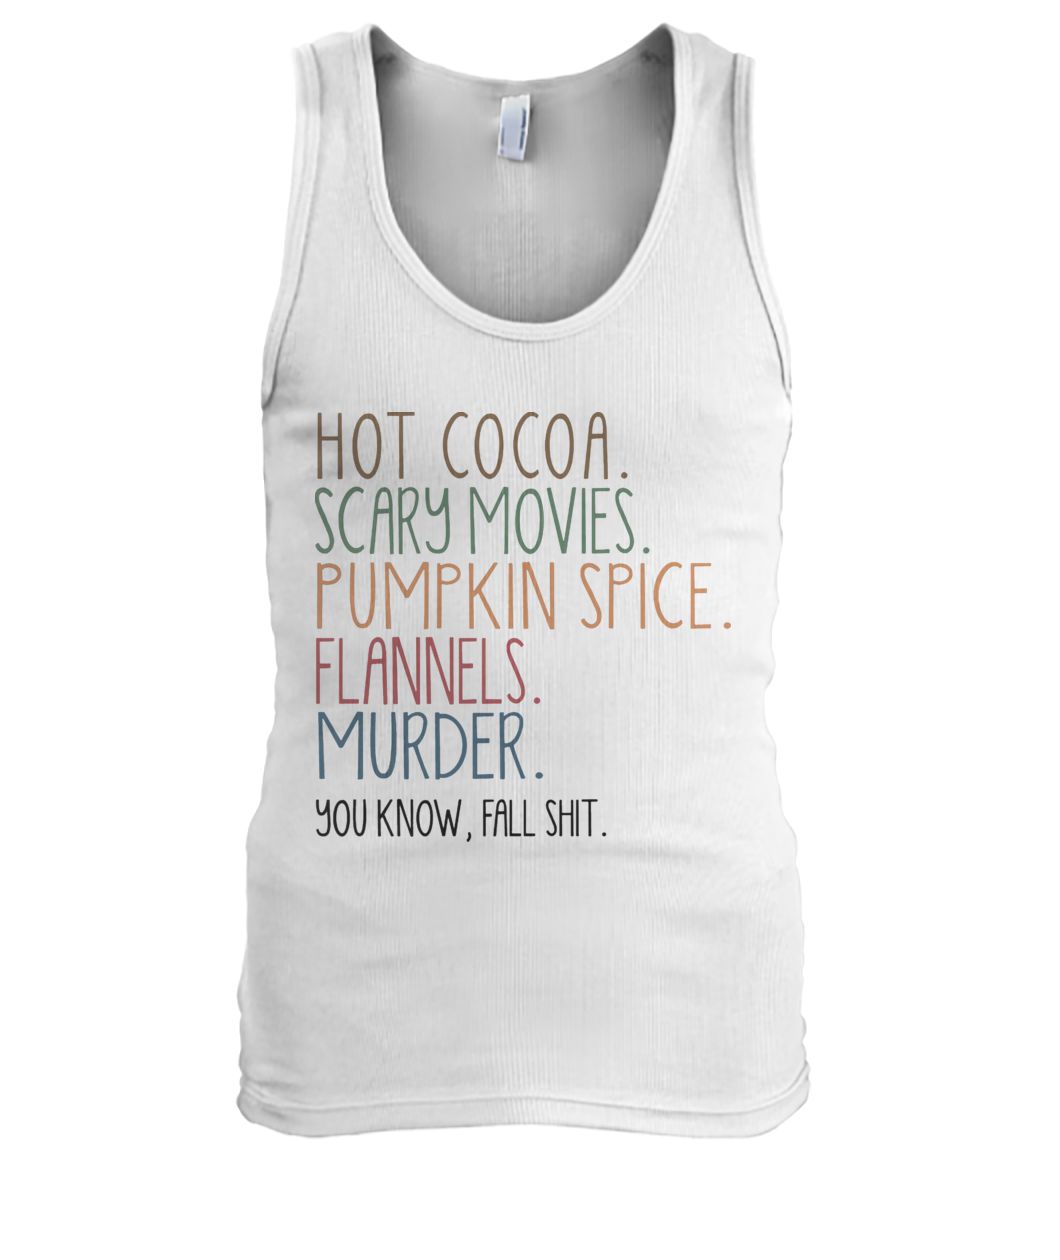 Hot cocoa scary movies pumpkin spice flannels murder you know fal shit men's tank top